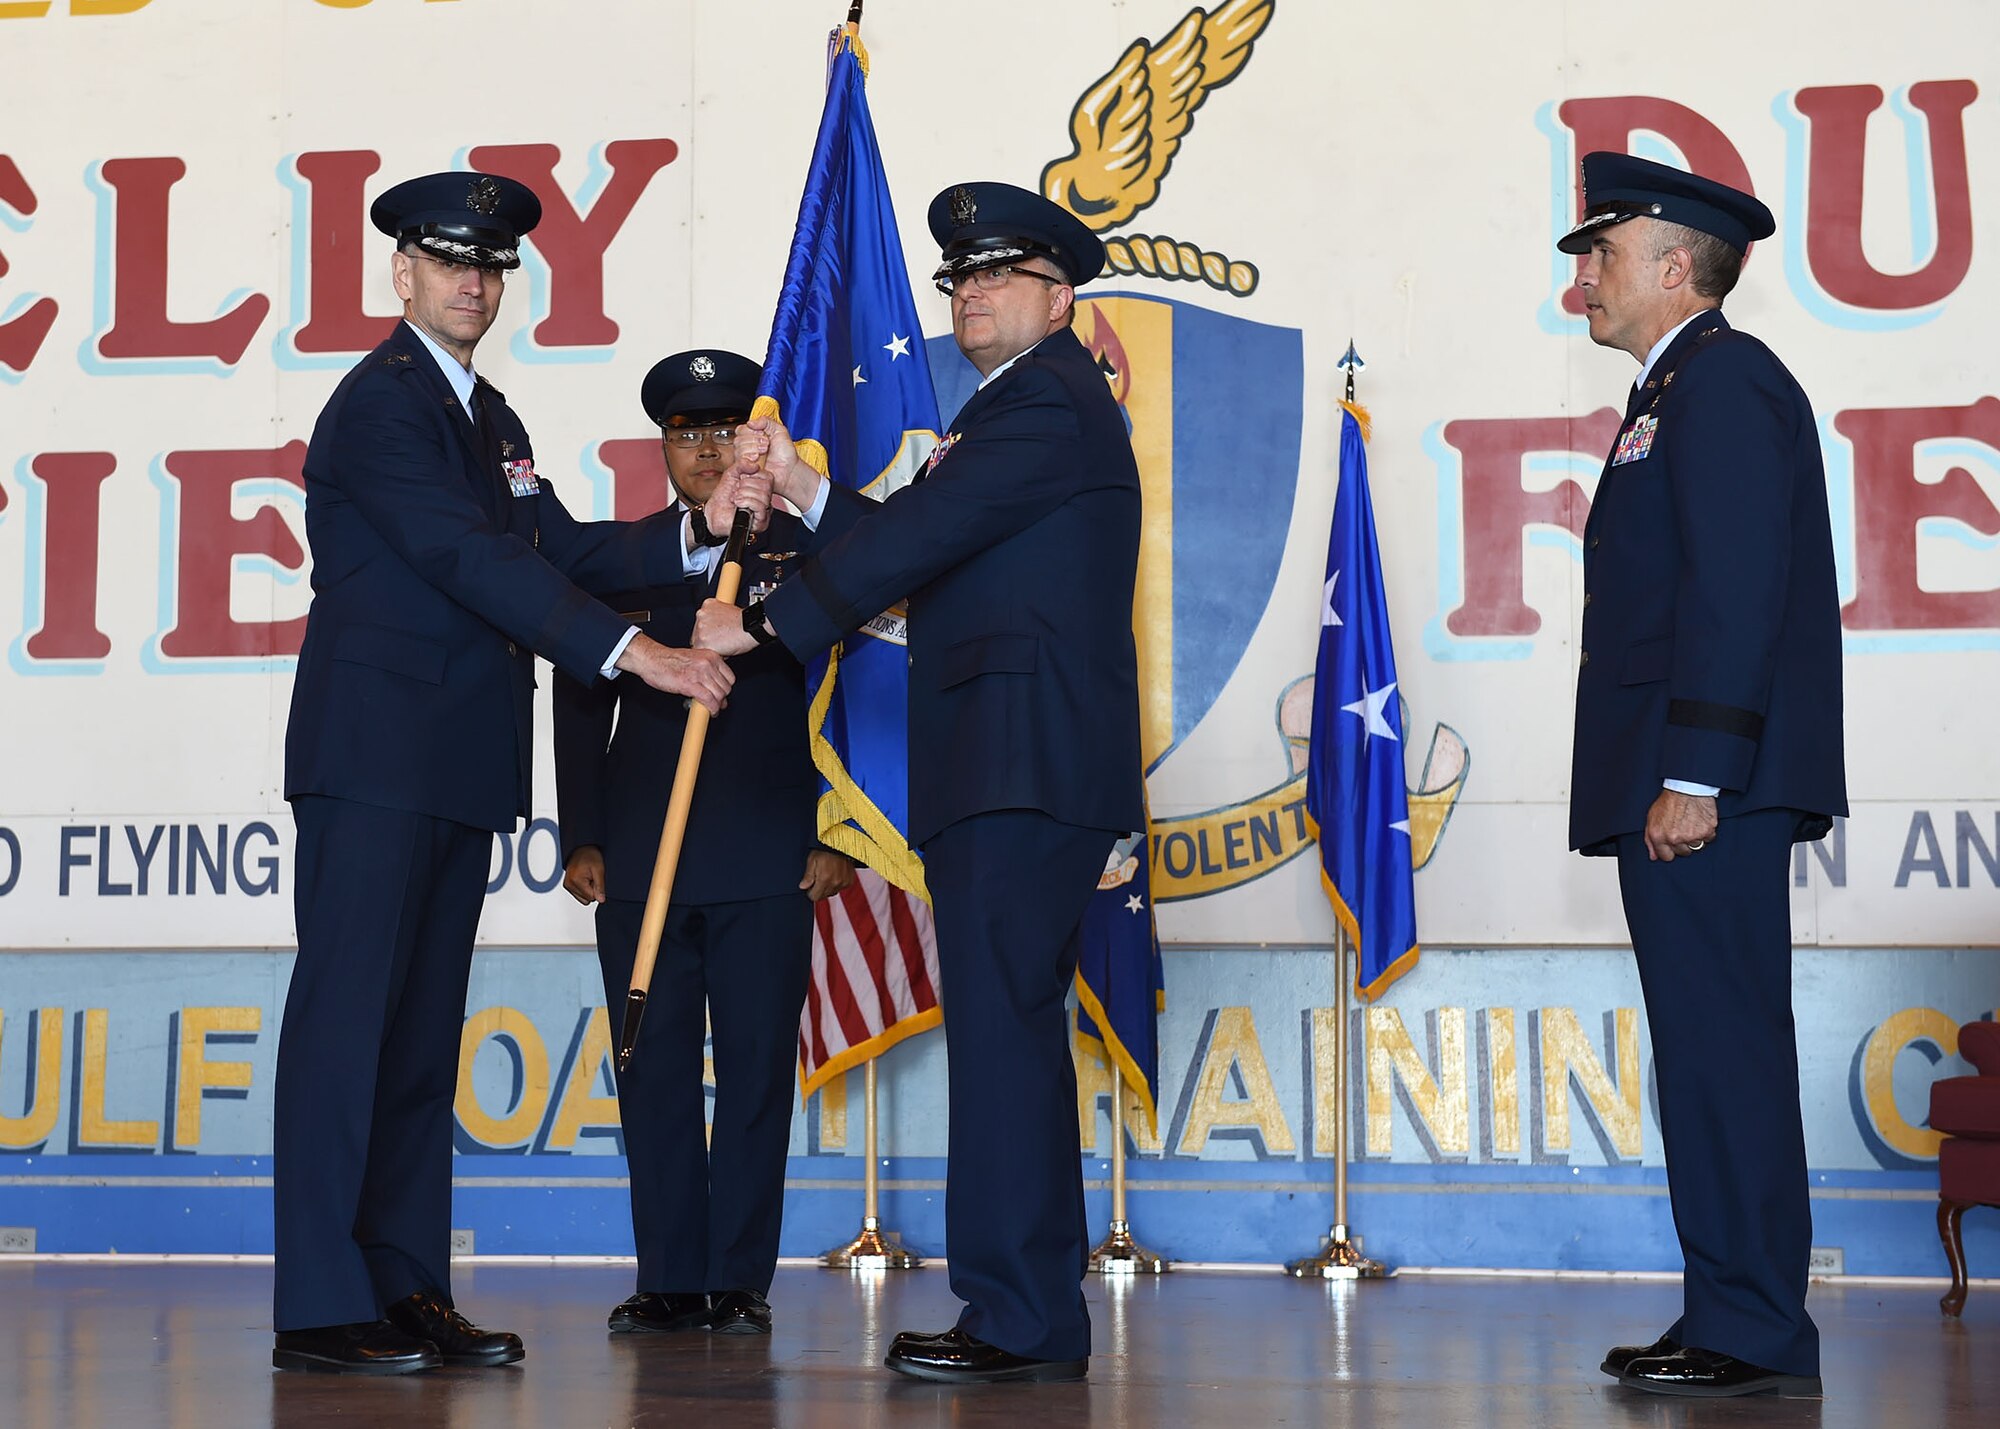 Lt. Gen. Mark A. Ediger (left), Surgeon General of the Air Force, receives the Air Force Medical Operations Agency guidon from Brig. Gen. Lee E. Payne (center), former AFMOA commander, during a May 6 change of command ceremony at Port San Antonio. In military tradition, the passing of a unit’s guidon signifies relinquishing or accepting command of that unit. 